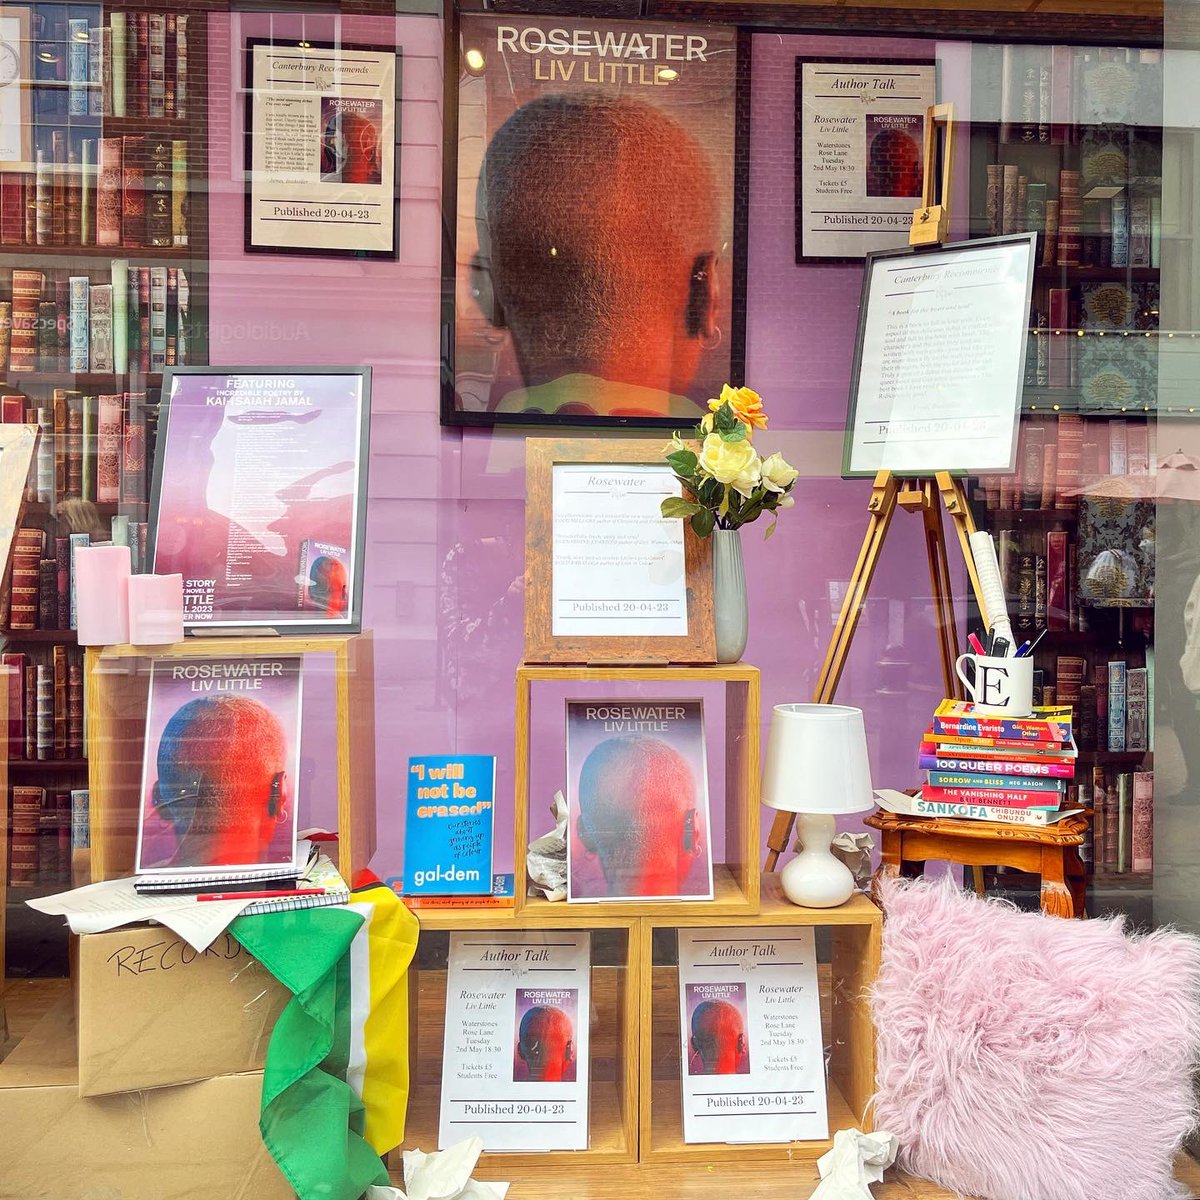 I put together this window display at work to celebrate the launch of ‘Rosewater’ by Liv Little - such a privilege to be able to shout about an author you look up to so dearly, celebrating queer poc love @dialoguebooks 🌹